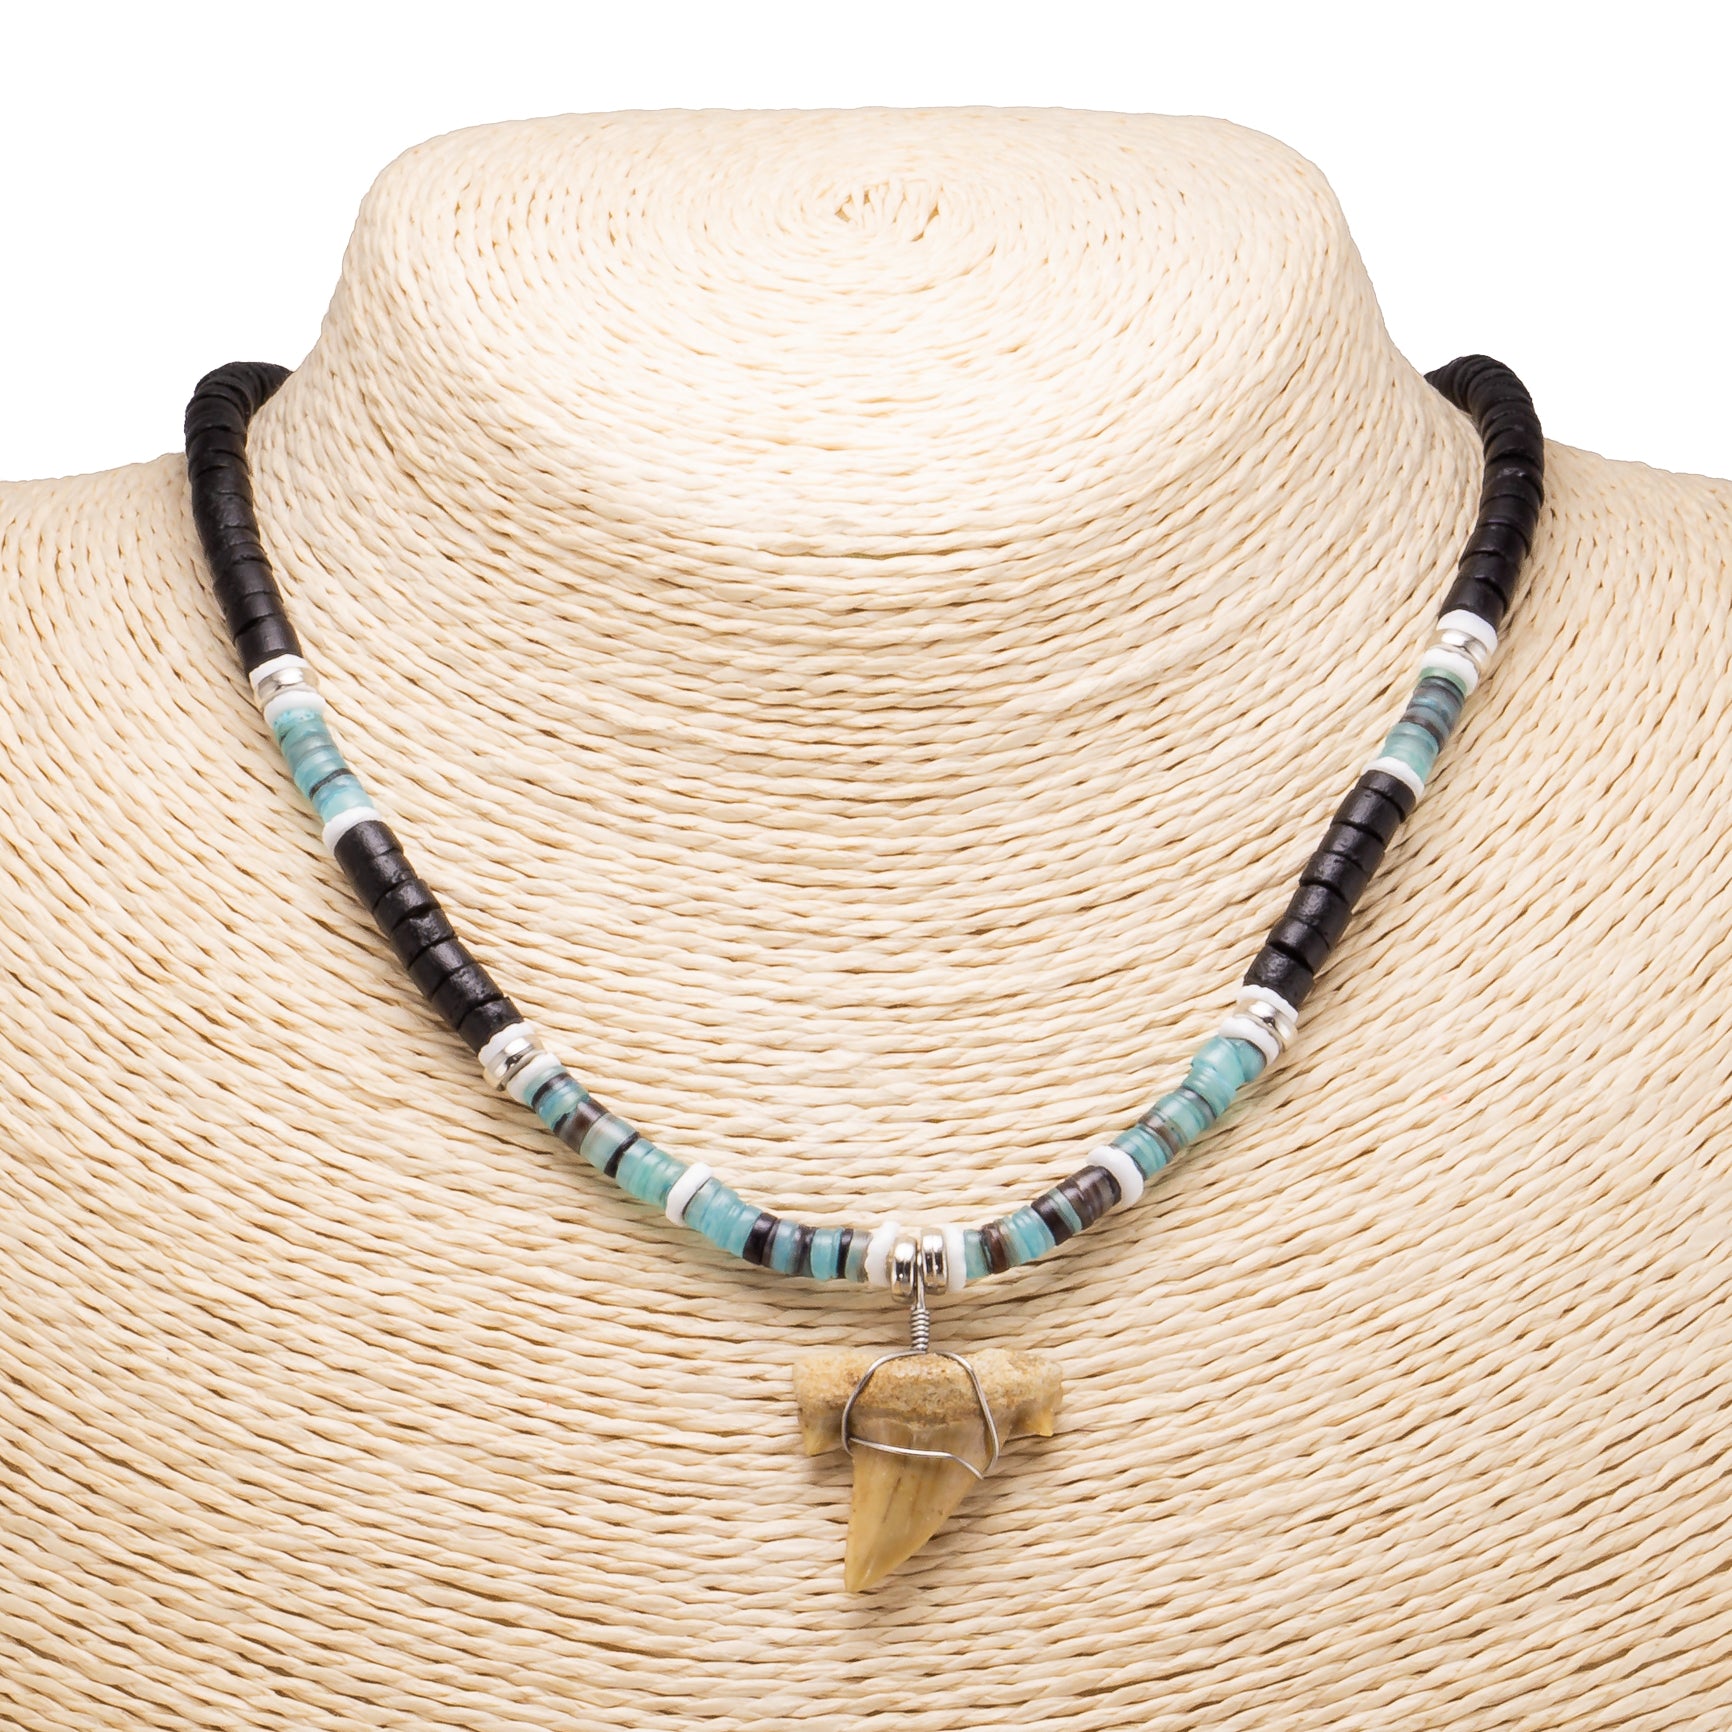 1"+ Shark Tooth Pendant on Black Coconut & Green Shell Beads Necklace